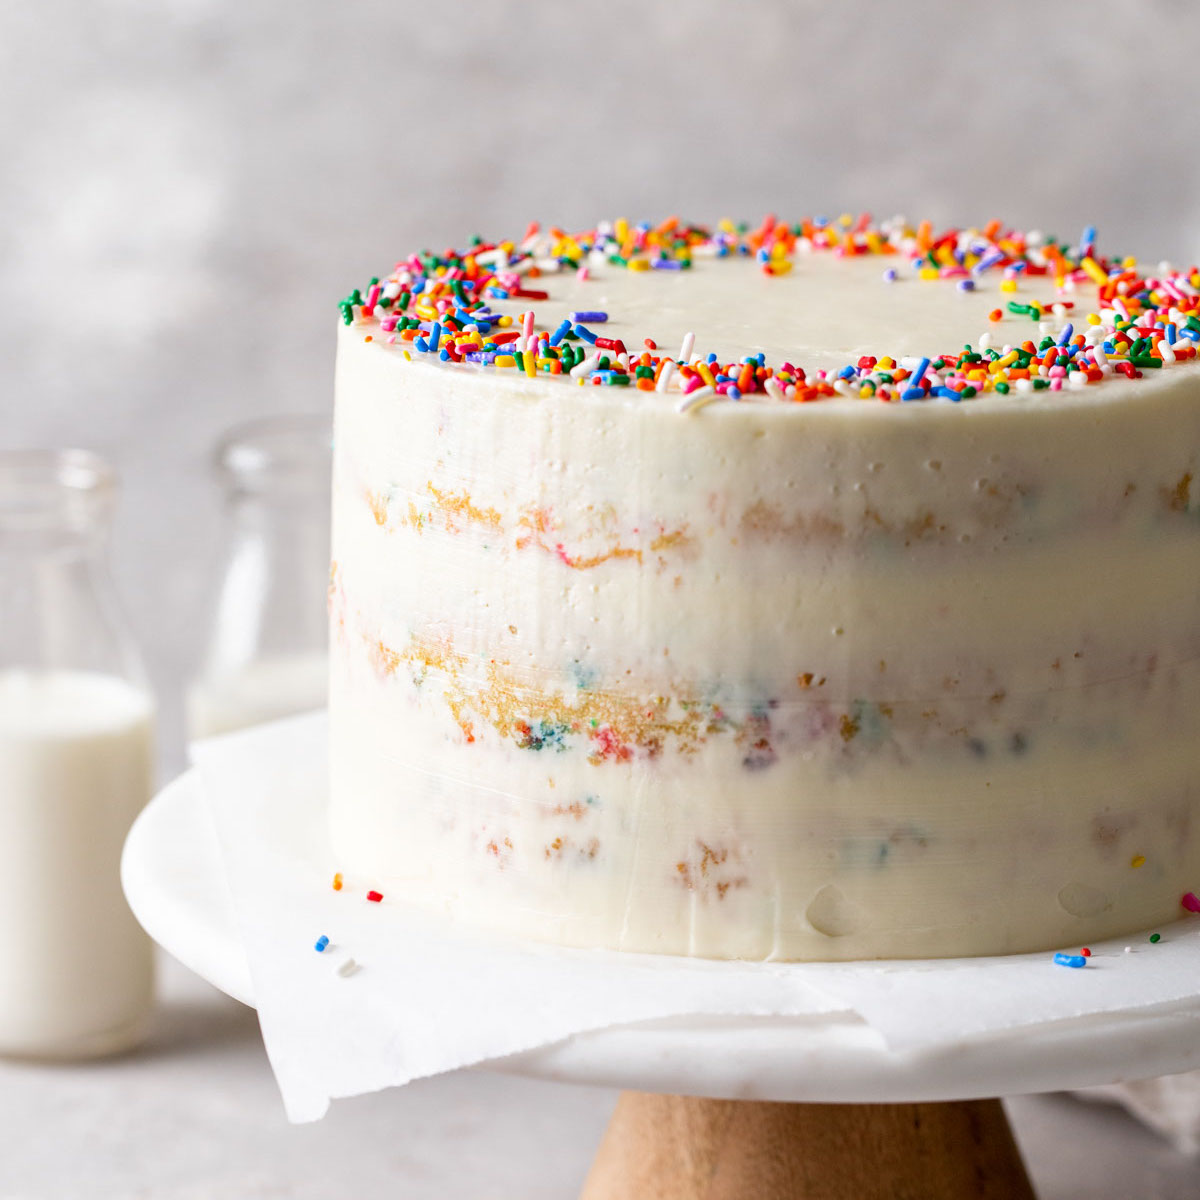 I Tried 4 Famous Funfetti Cake Recipes and the Winner Was Clear | The Kitchn